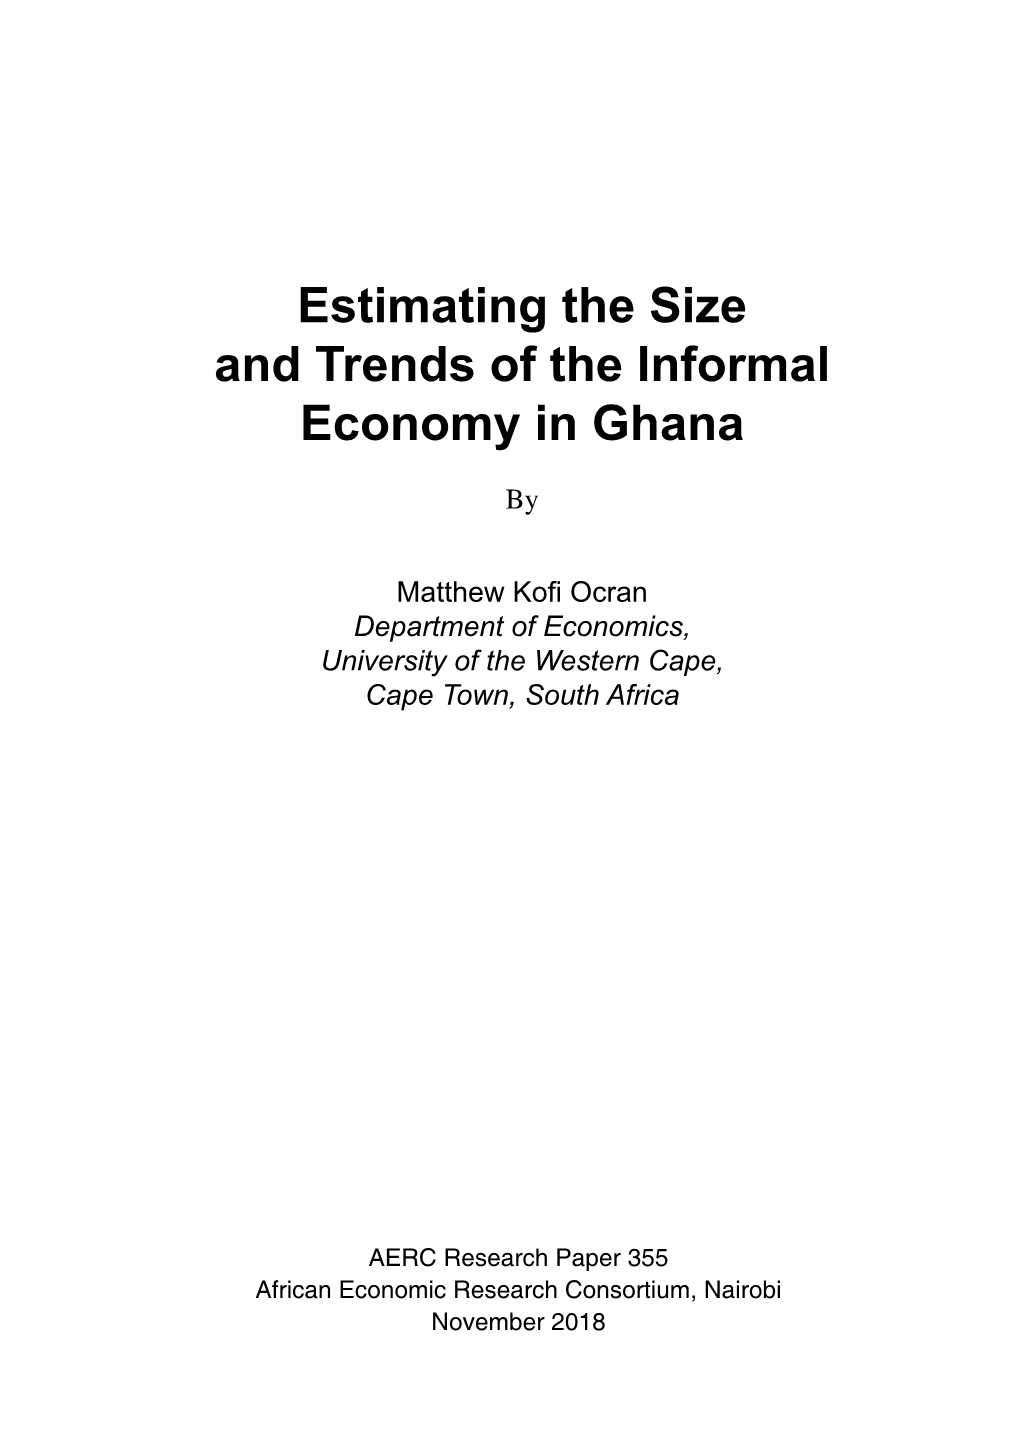 Estimating the Size and Trends of the Informal Economy in Ghana